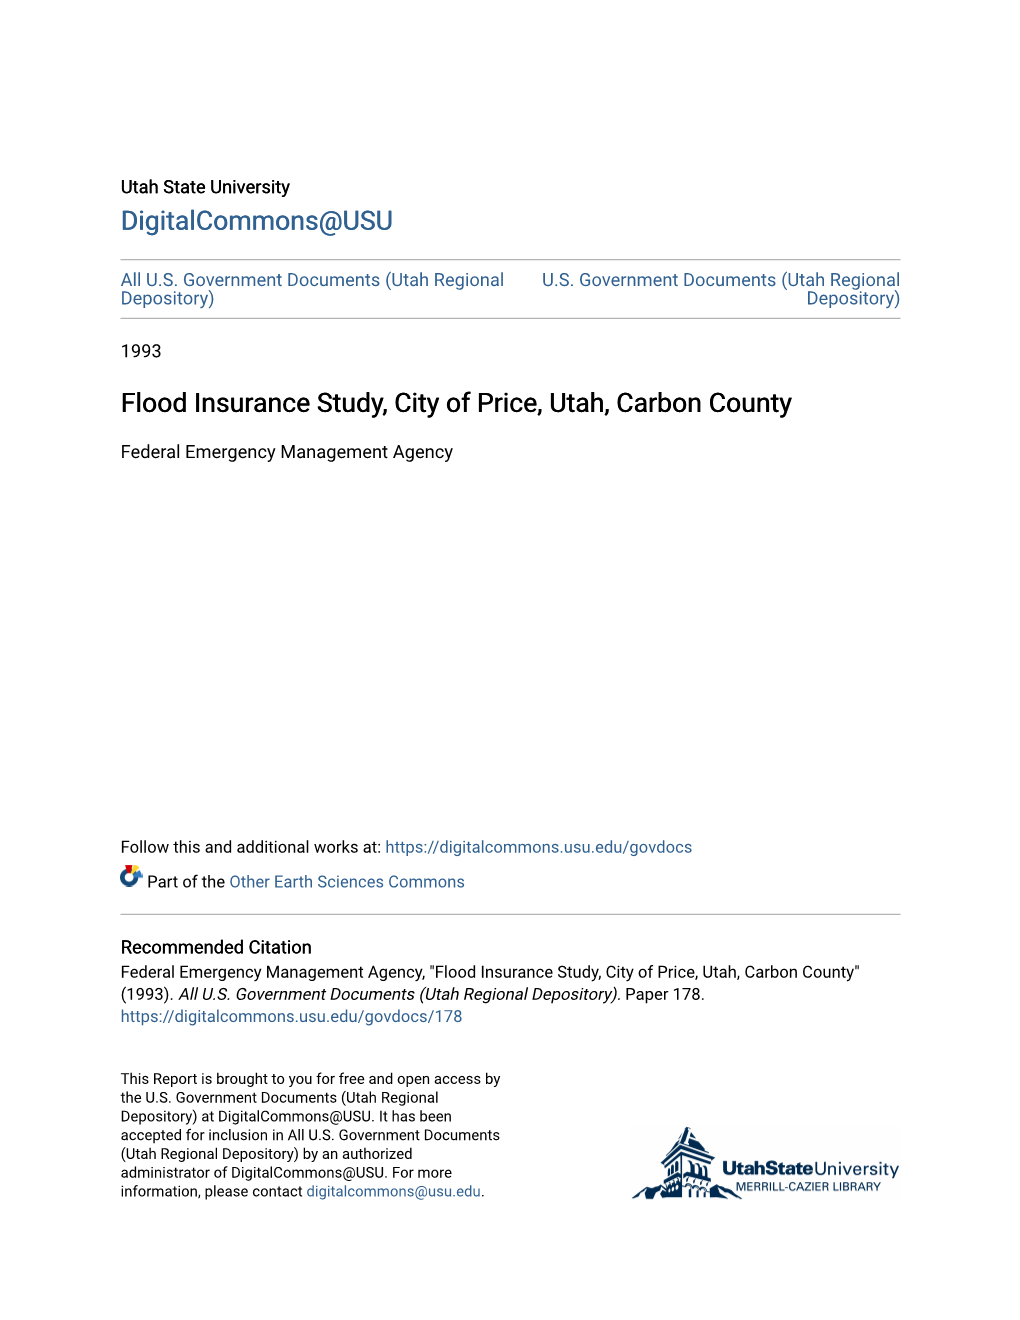 Flood Insurance Study, City of Price, Utah, Carbon County